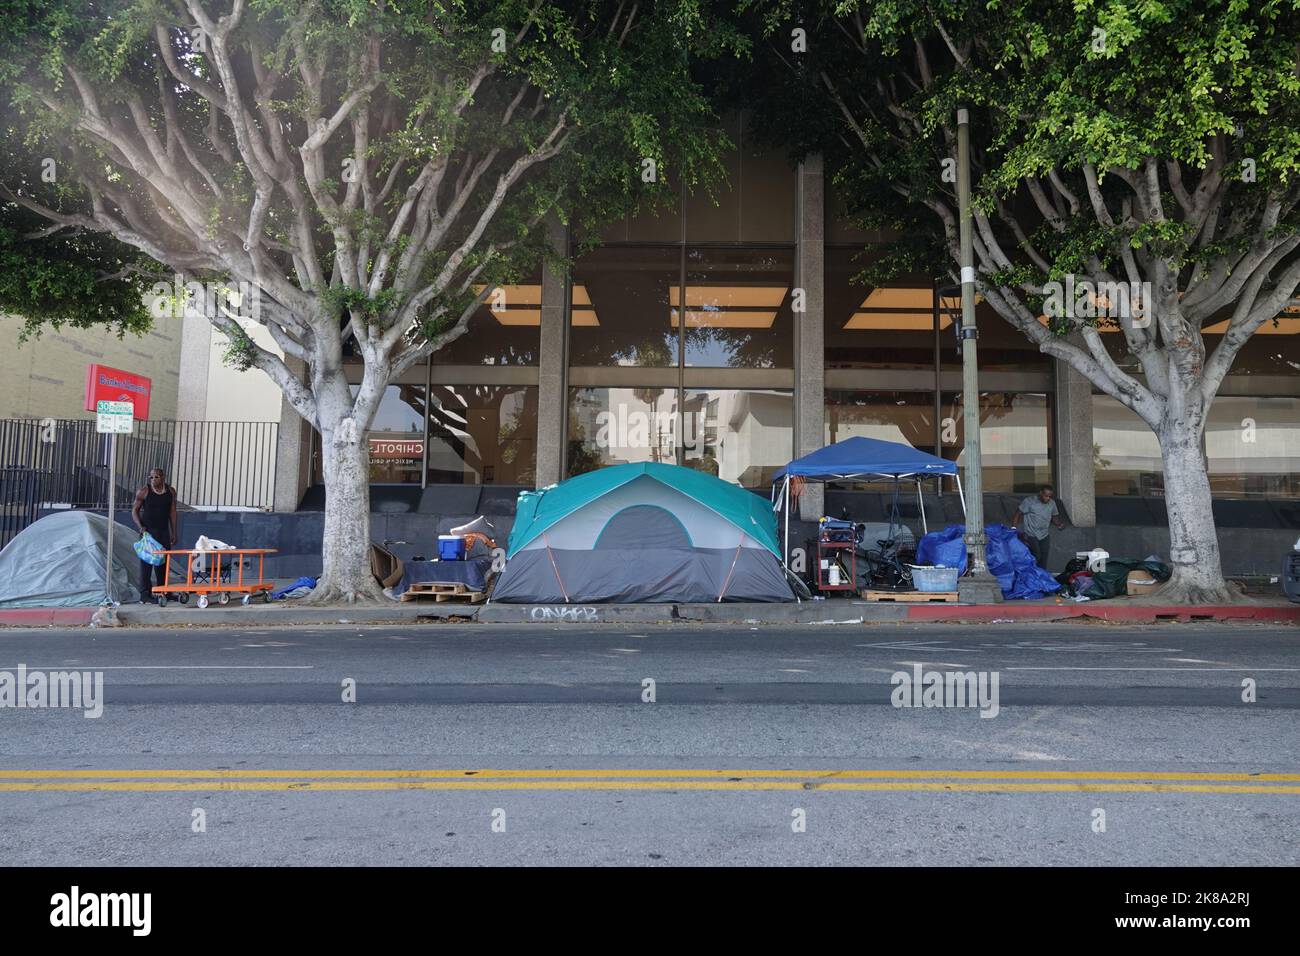 Hollywood, California / USA - Oct. 12, 2022: Tents of unhoused people are shown along a sidewalk in Los Angeles during the day. For editorial uses onl Stock Photo